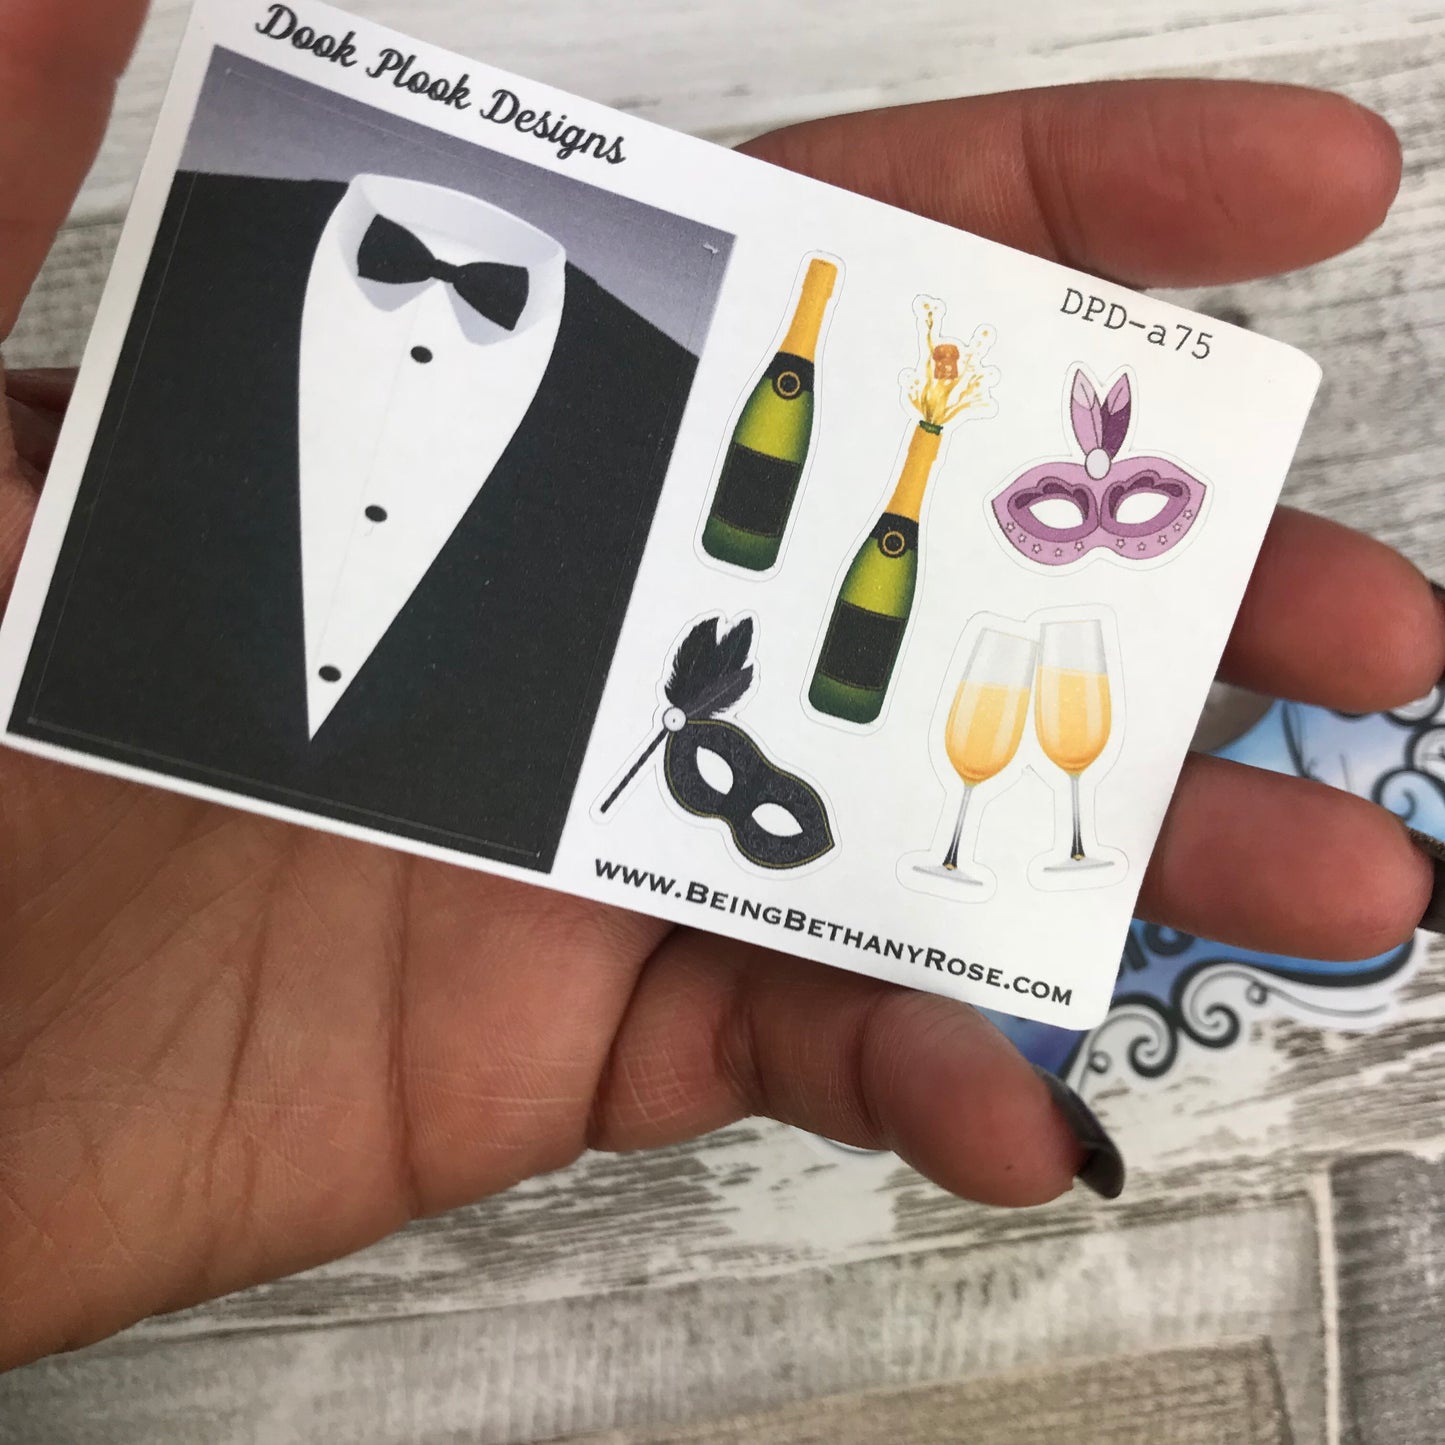 Black Tie Event / Ball stickers - Small Sampler Size (A75)